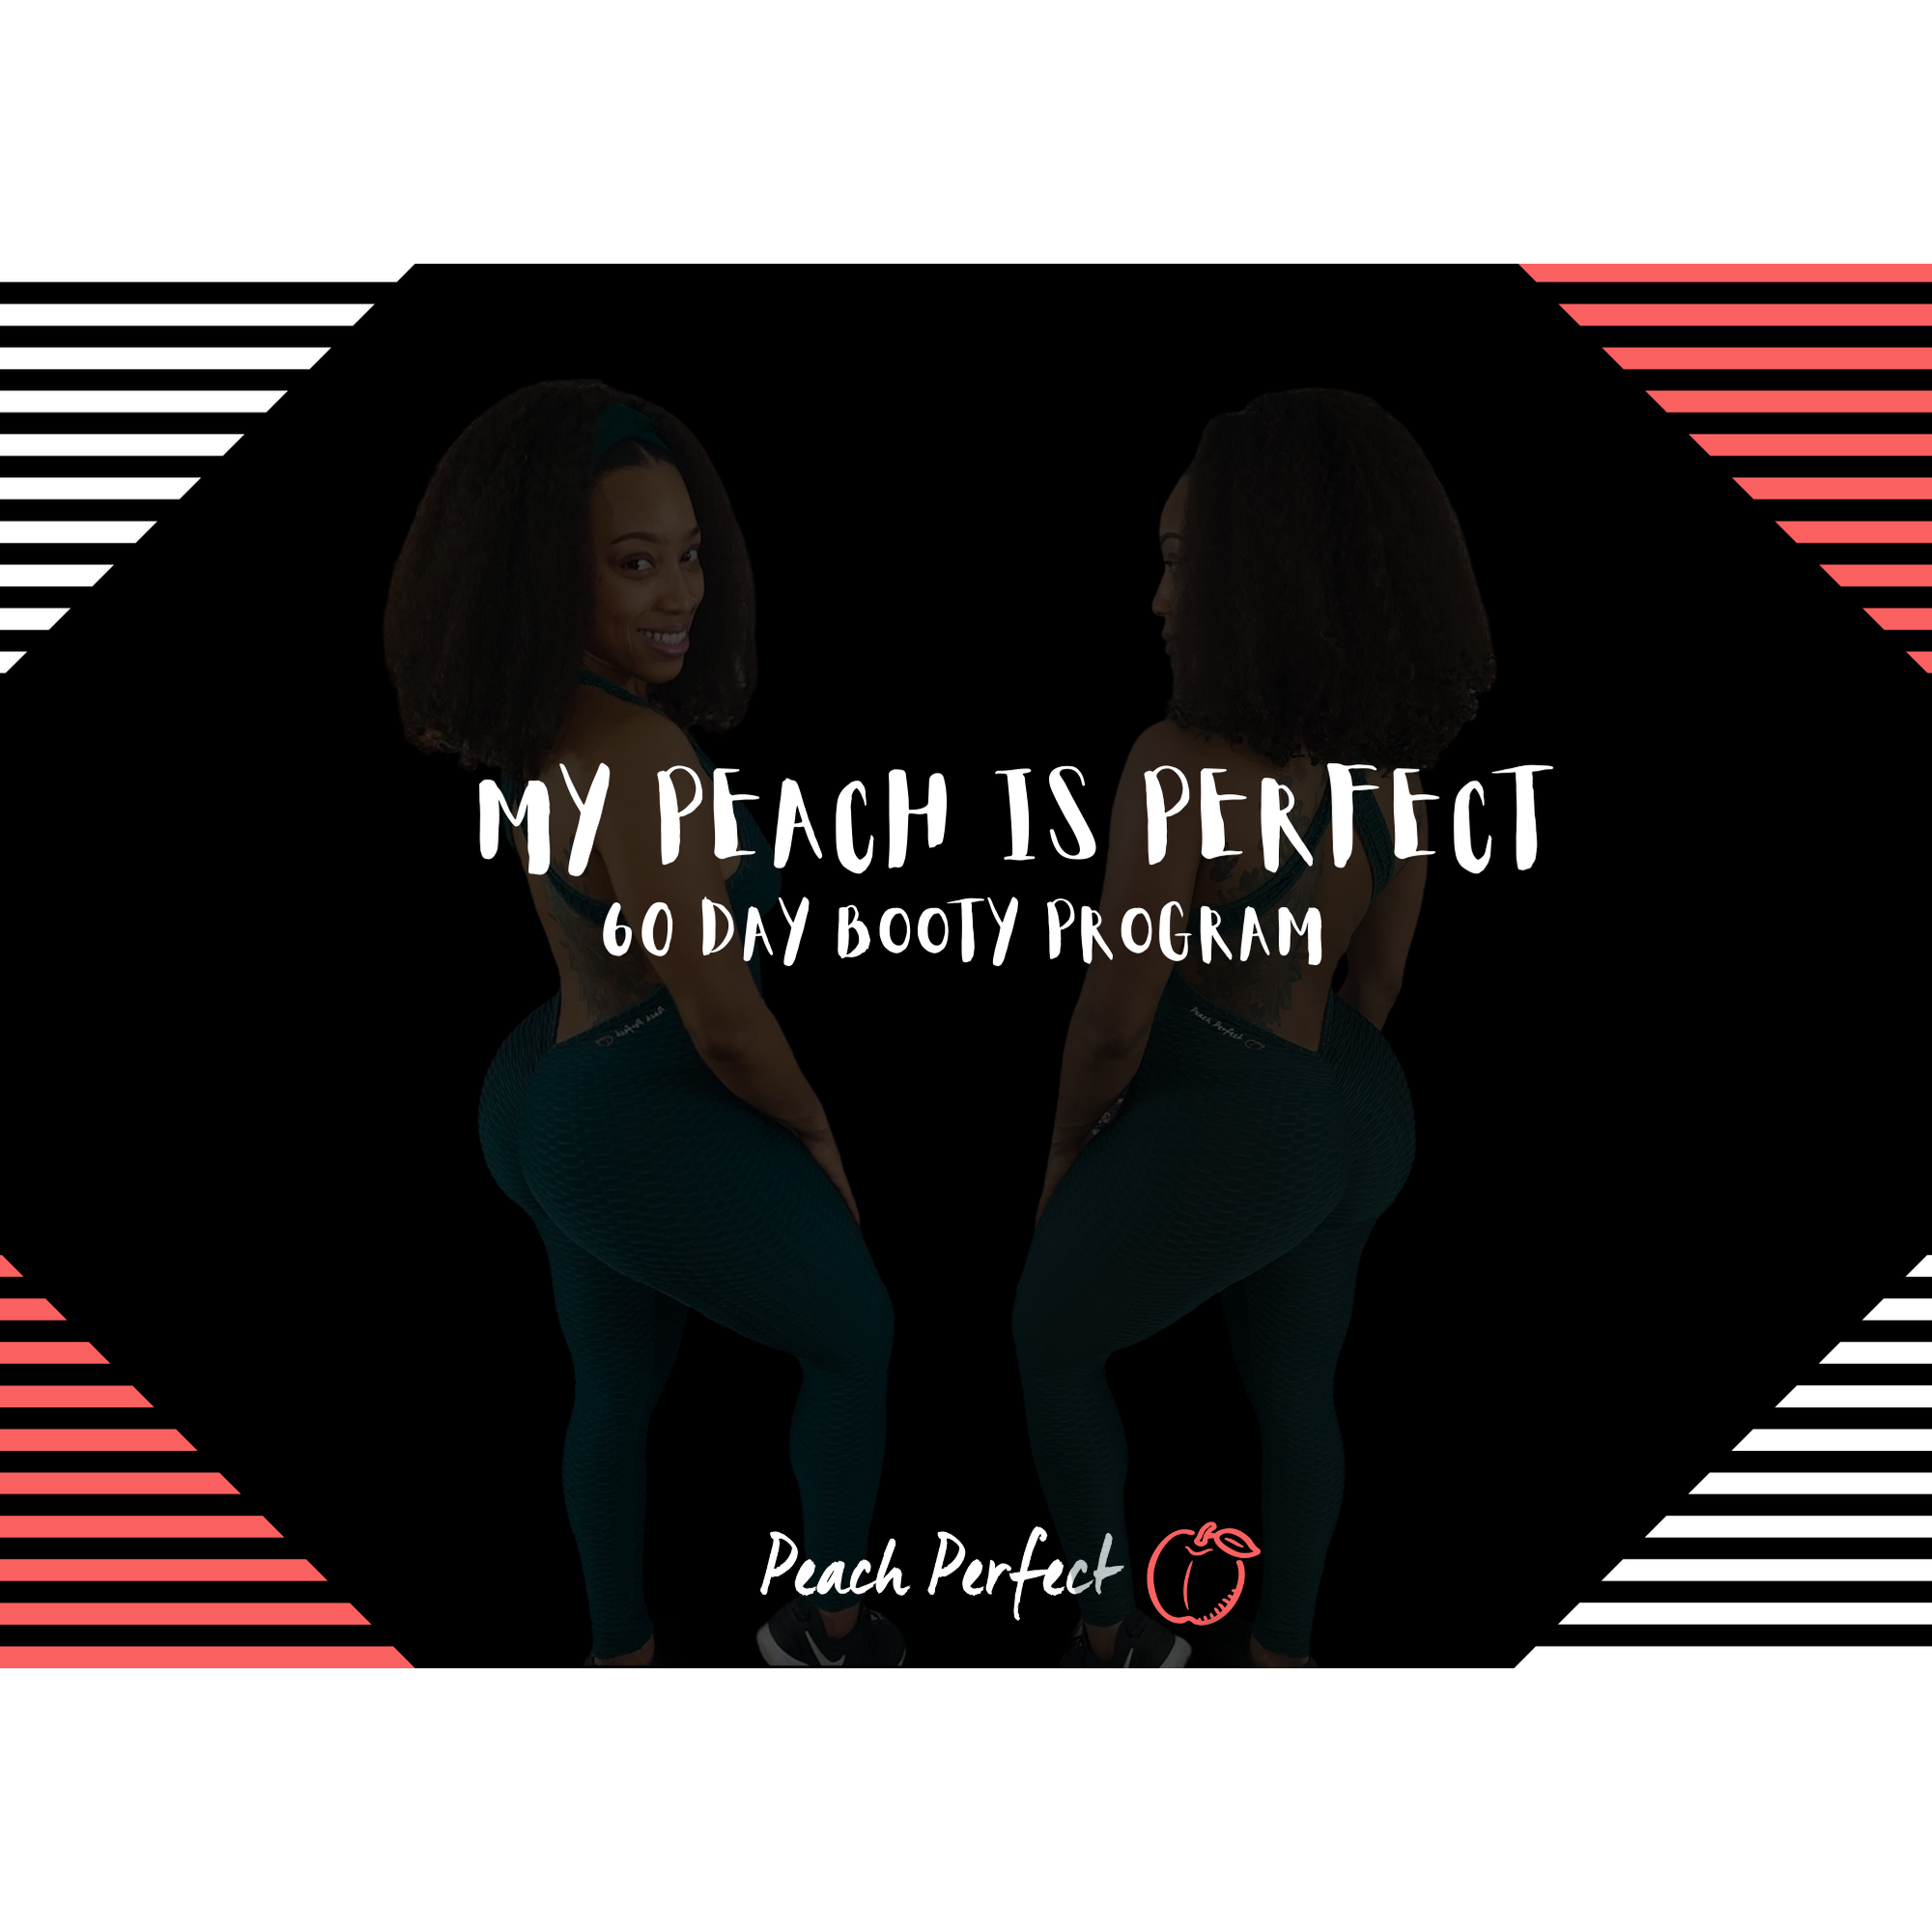 My Peach Is Perfect 60 Day Booty Growth Program – Peach Perfect